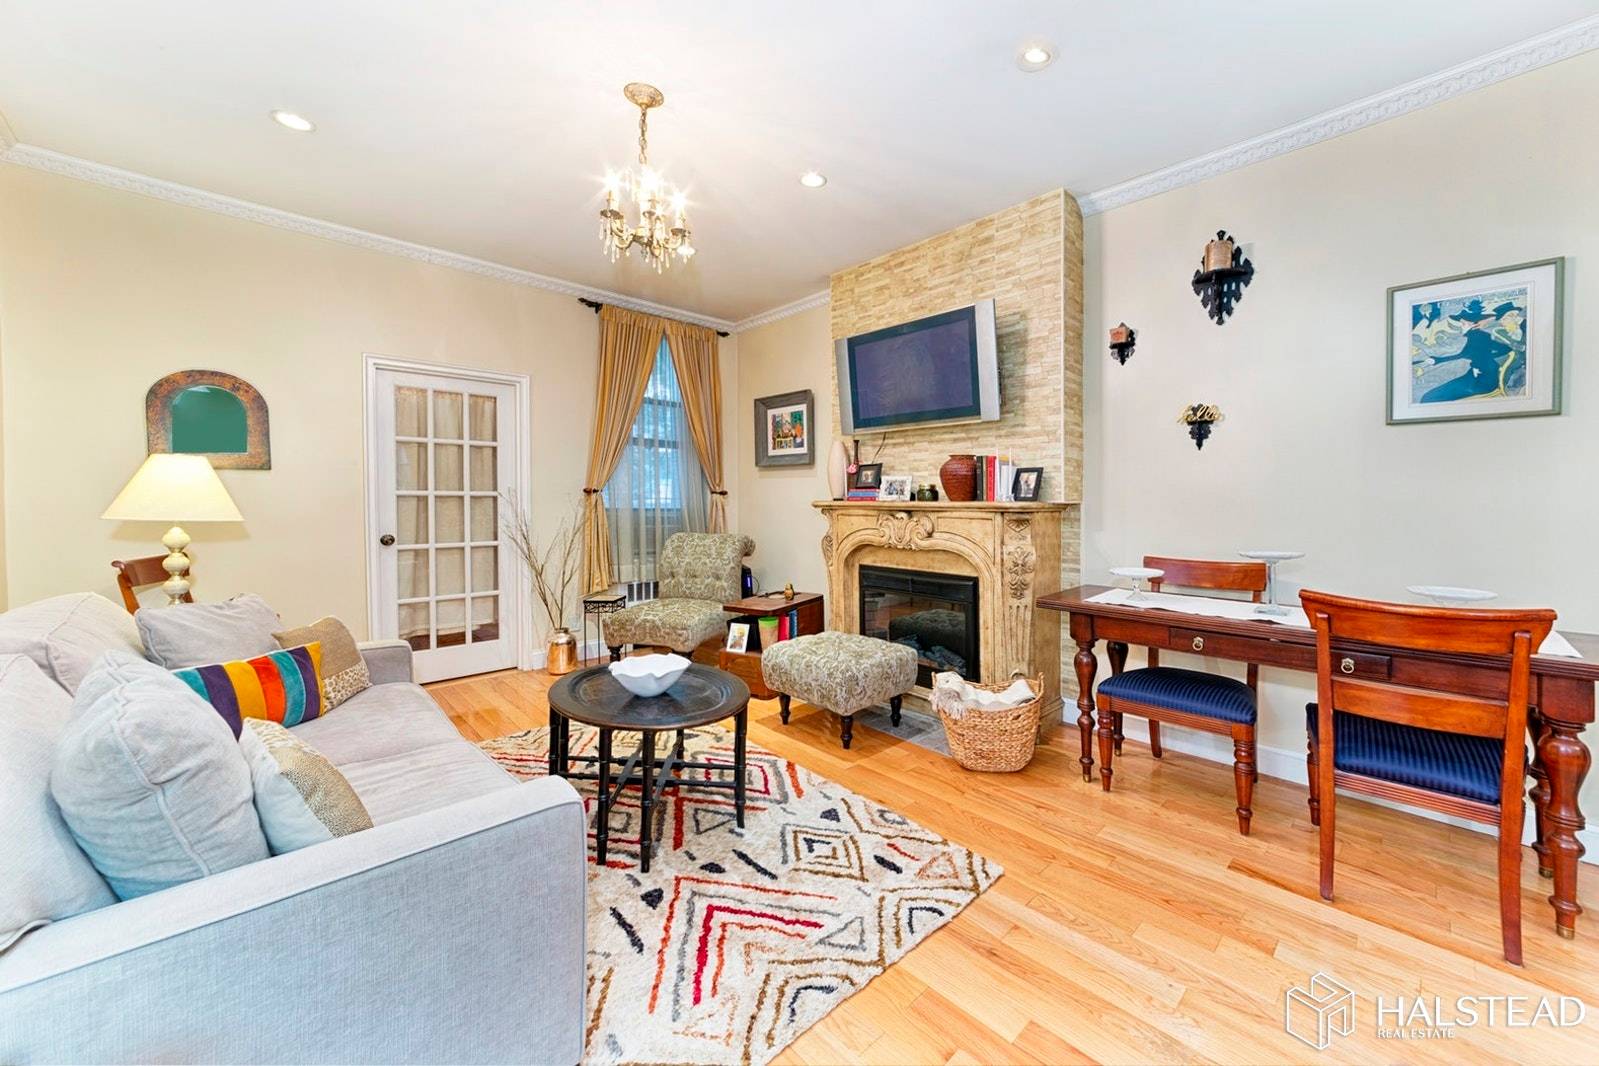 Renovated one bedroom apartment in a lovely coop building on the Upper East Side.